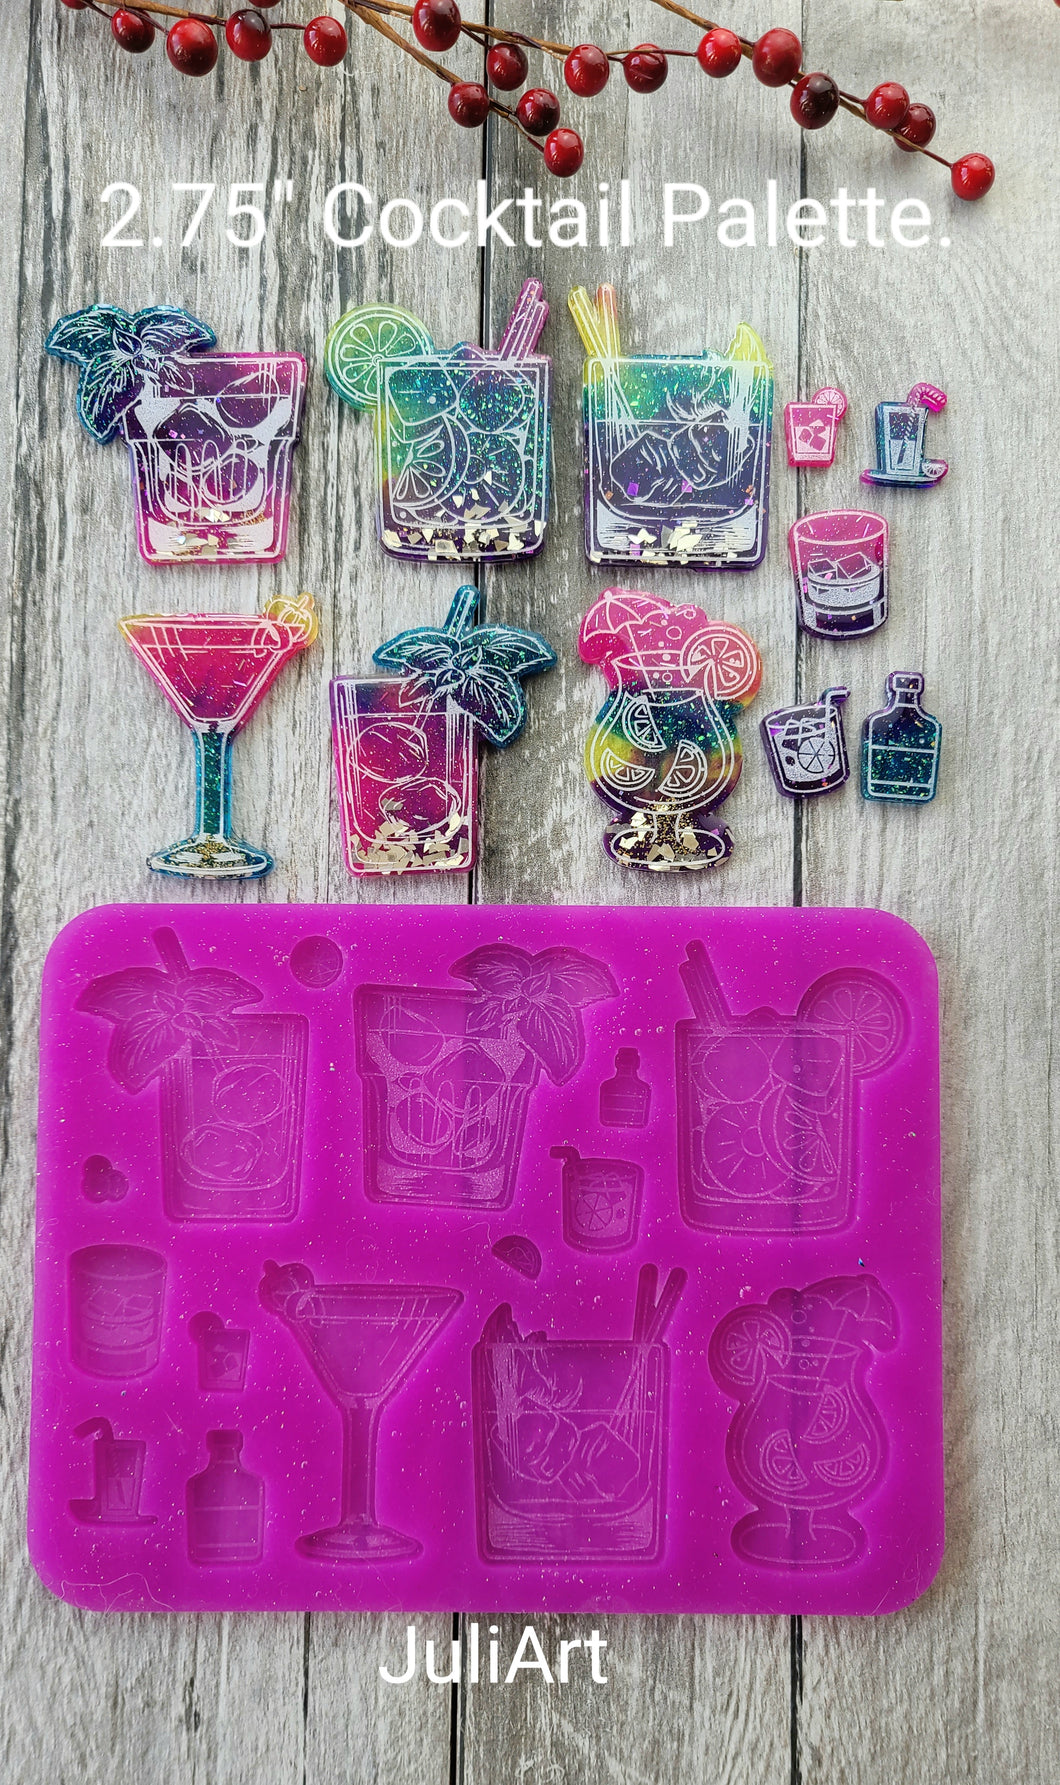 2.75 inch Cocktail Palette Silicone Mold for Resin casting